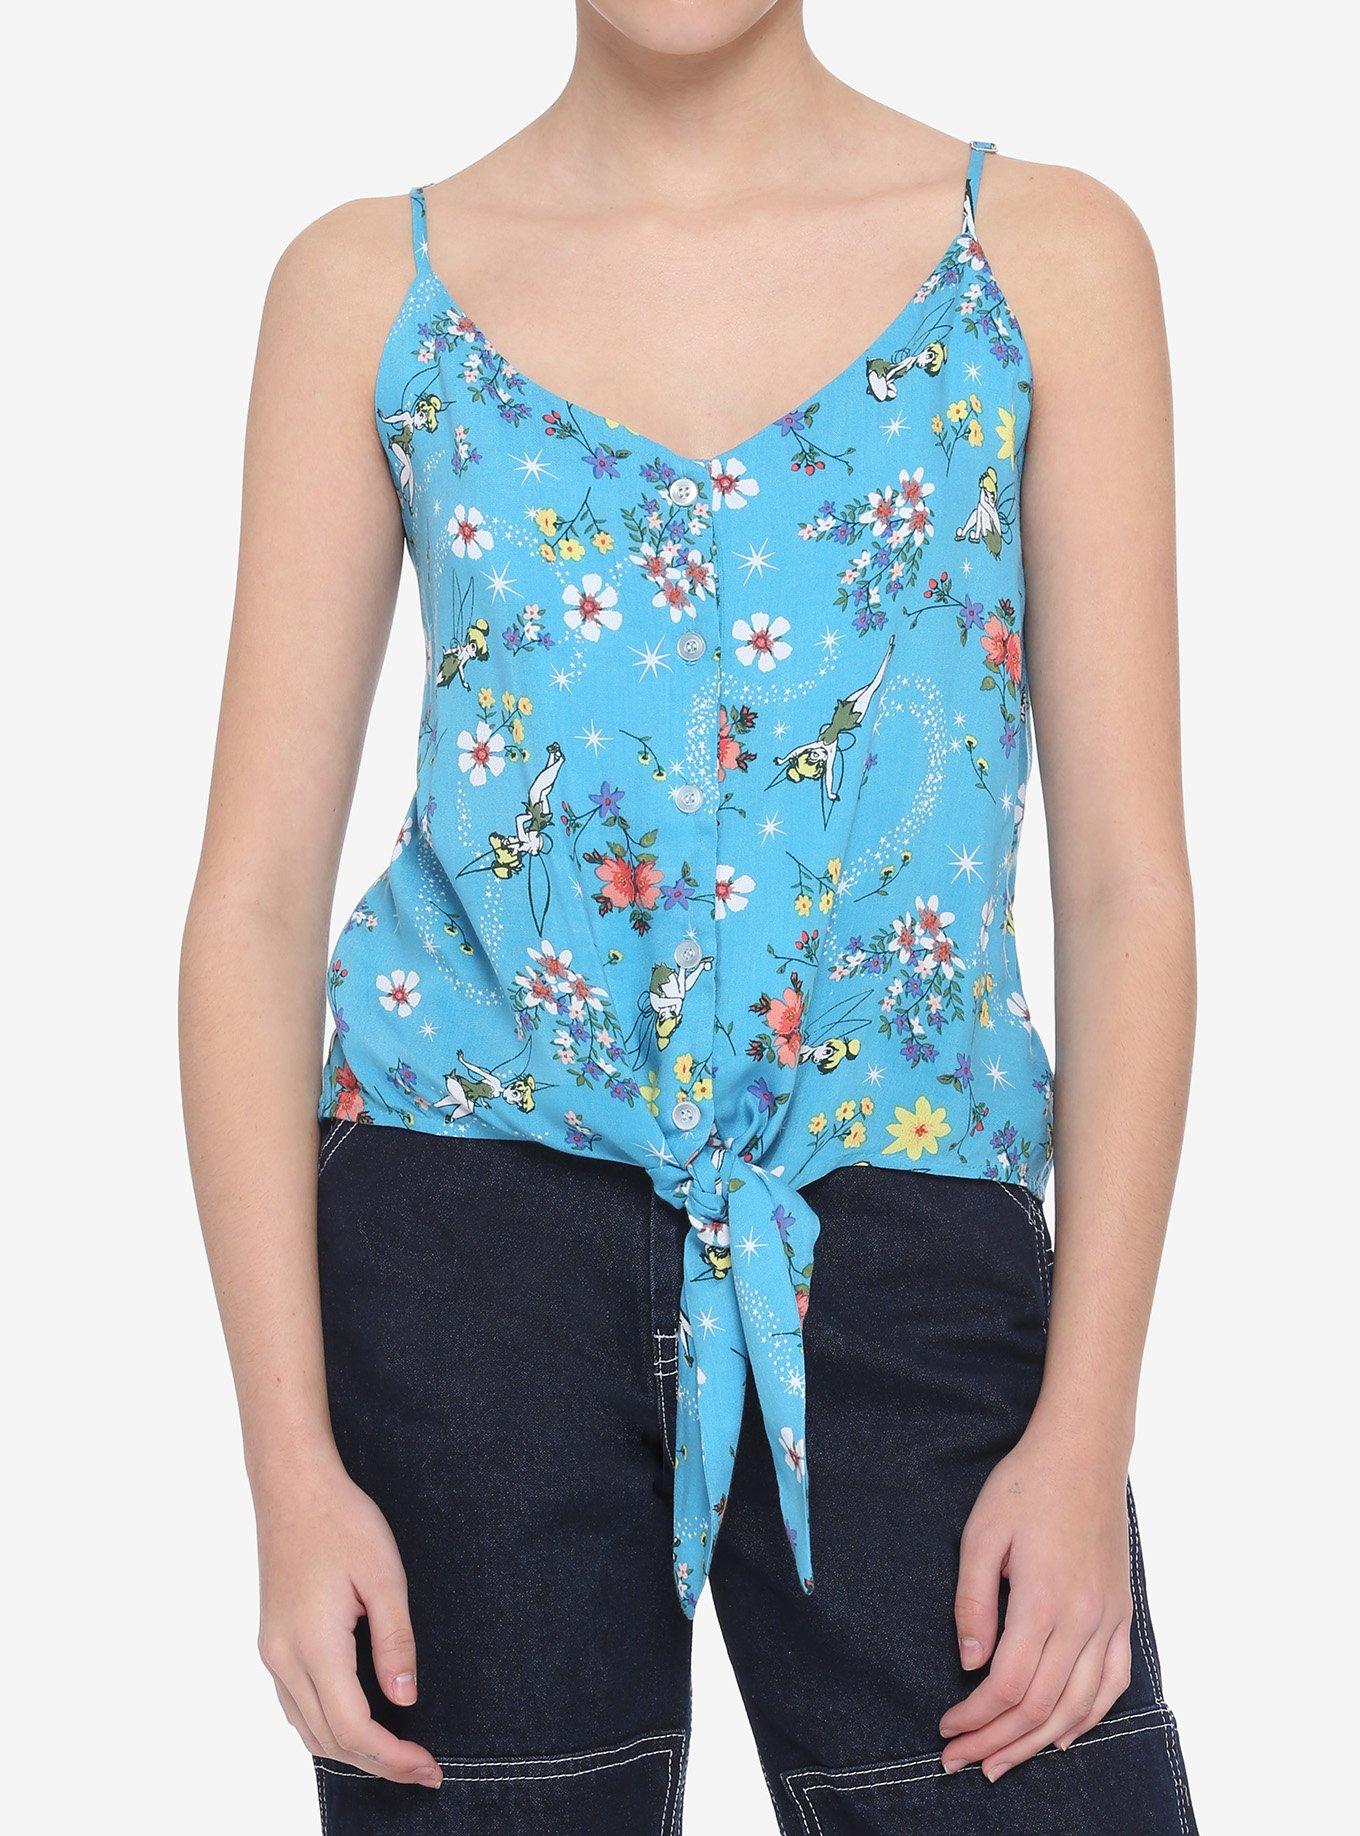 Disney Peter Pan Tinker Bell Strappy Tie-Front Girls Woven Button-Up Tank Top, MULTI, hi-res